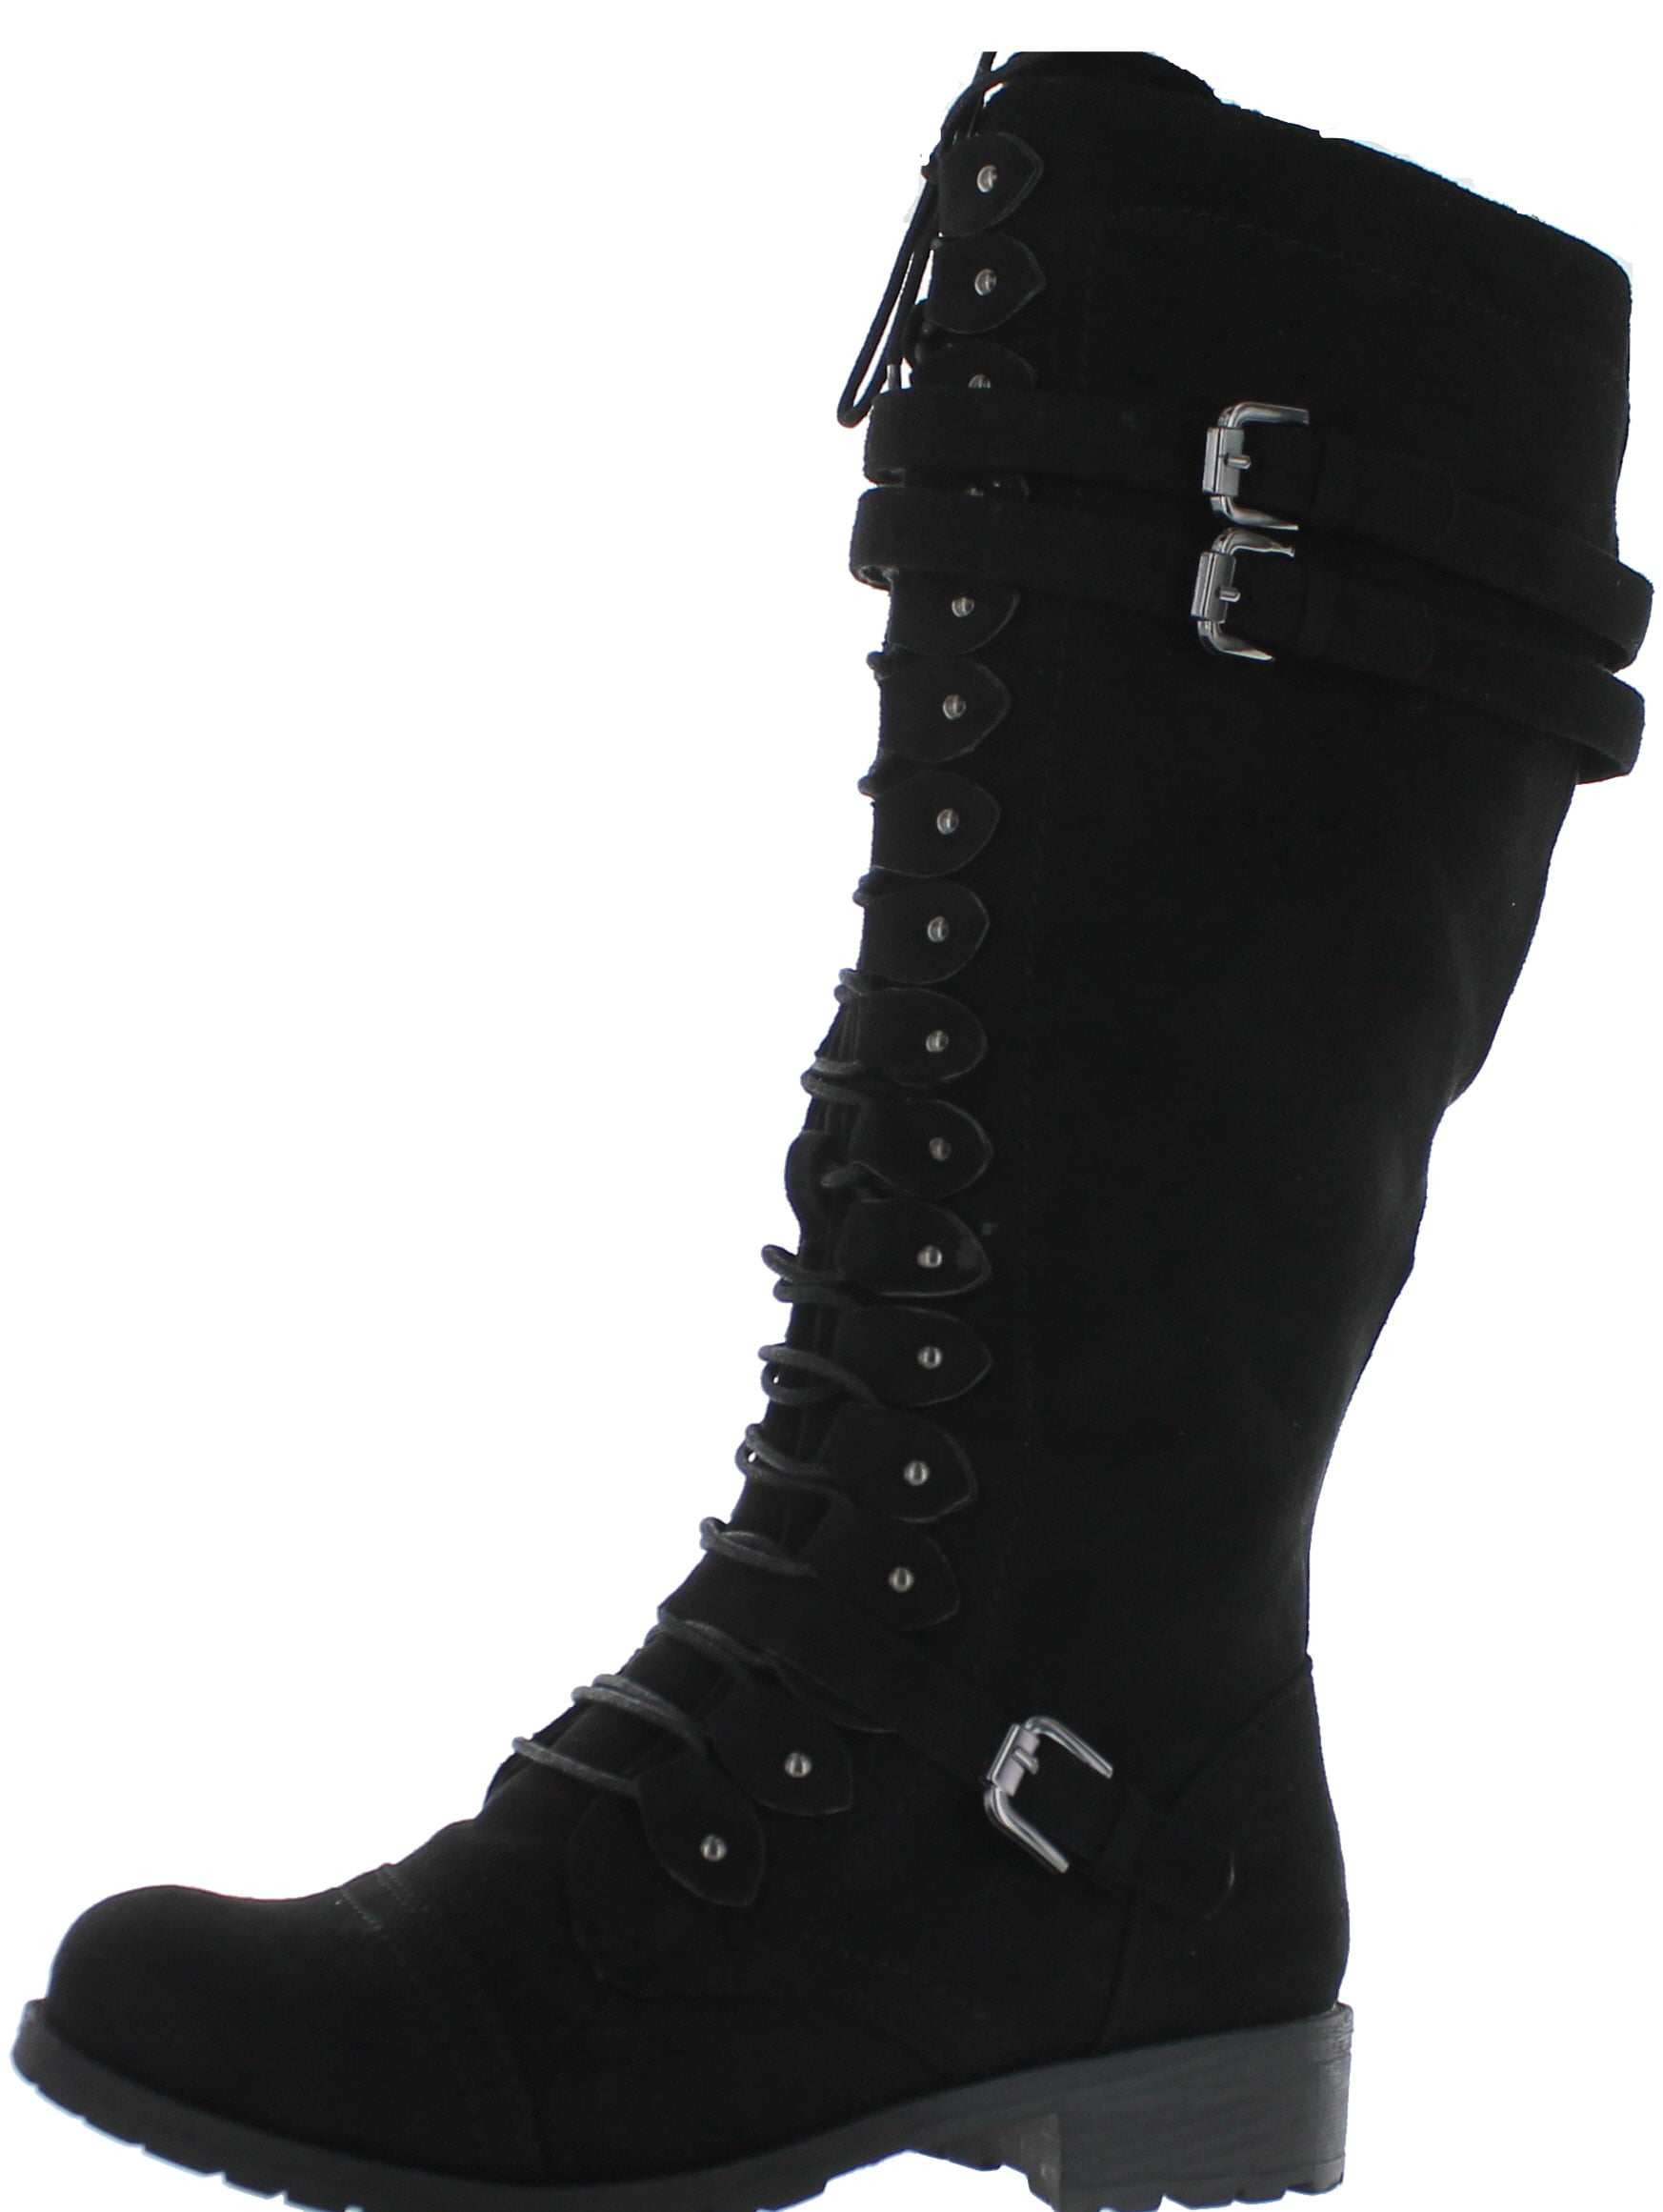 Wild Diva Timberly Womens Fashion Lace Up Buckle Knee High Combat Boots